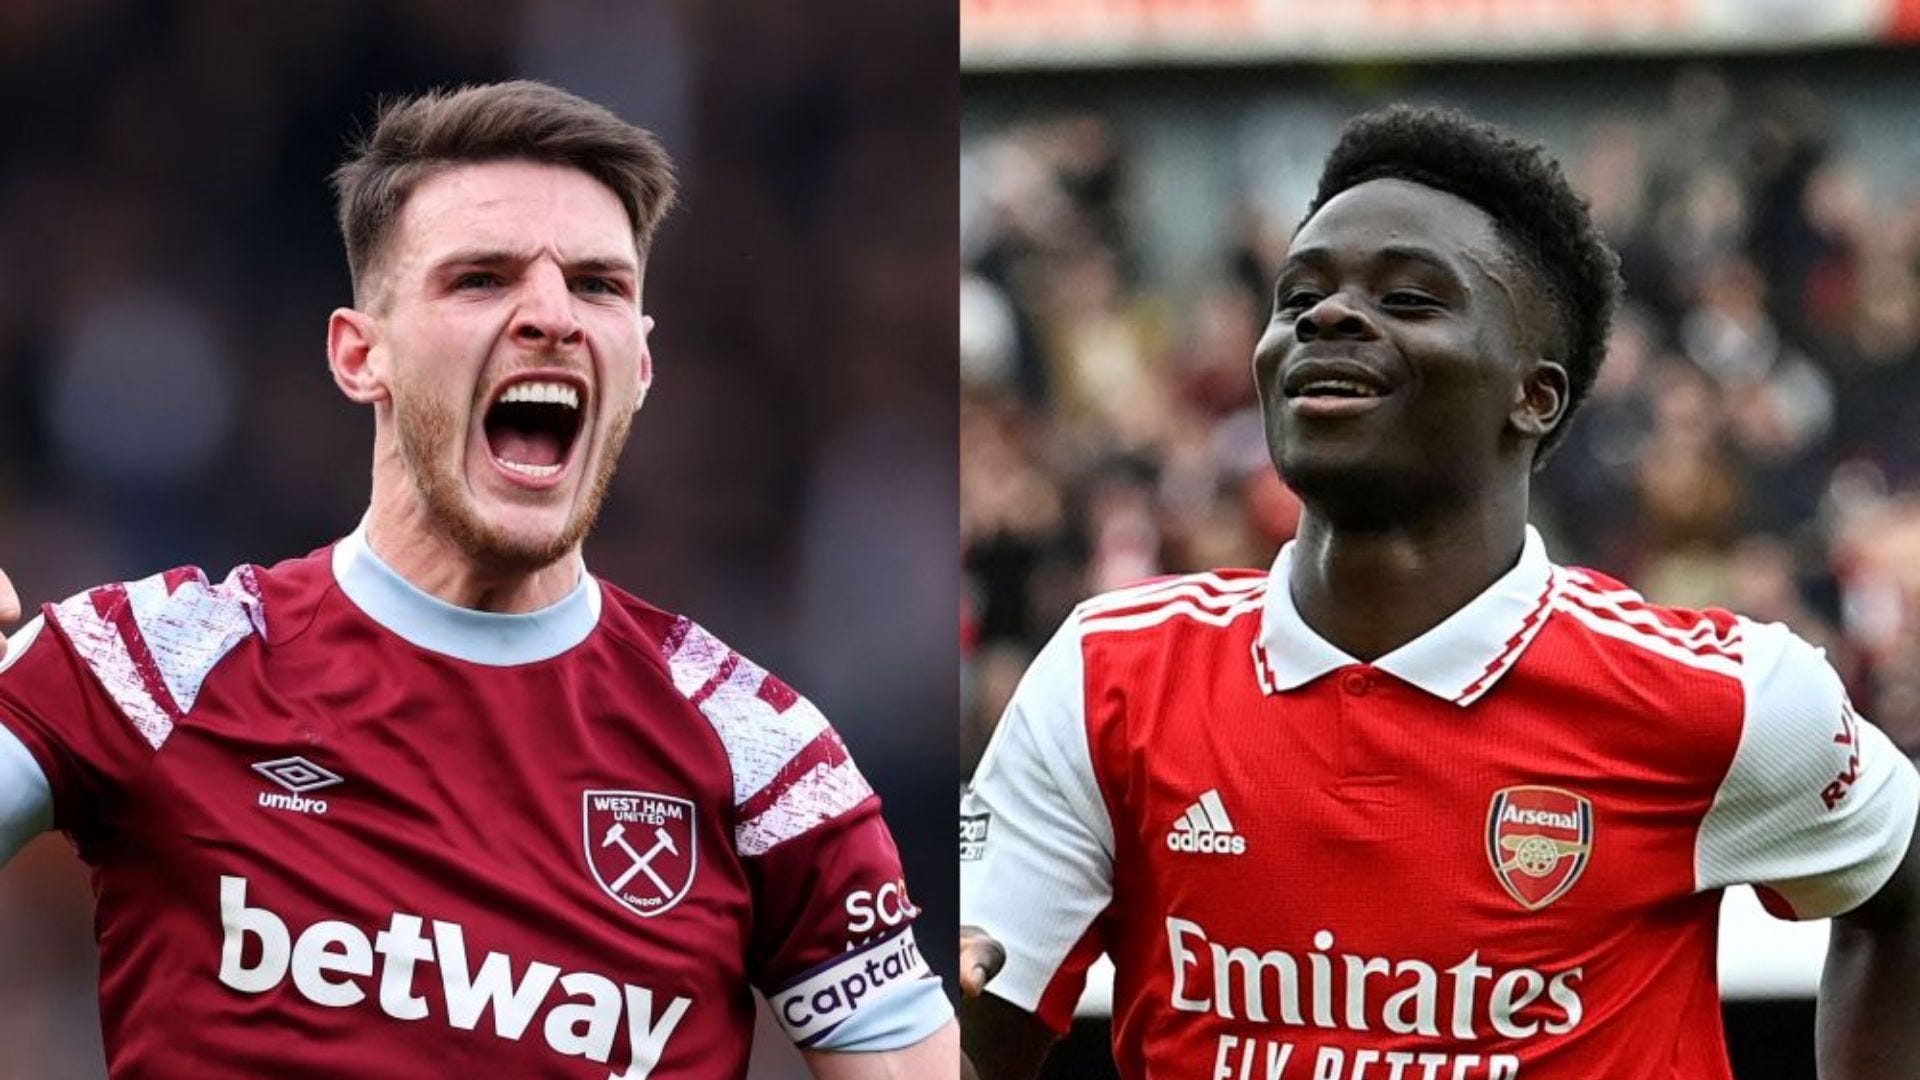 West Ham vs Arsenal Where to watch the match online, live stream, TV